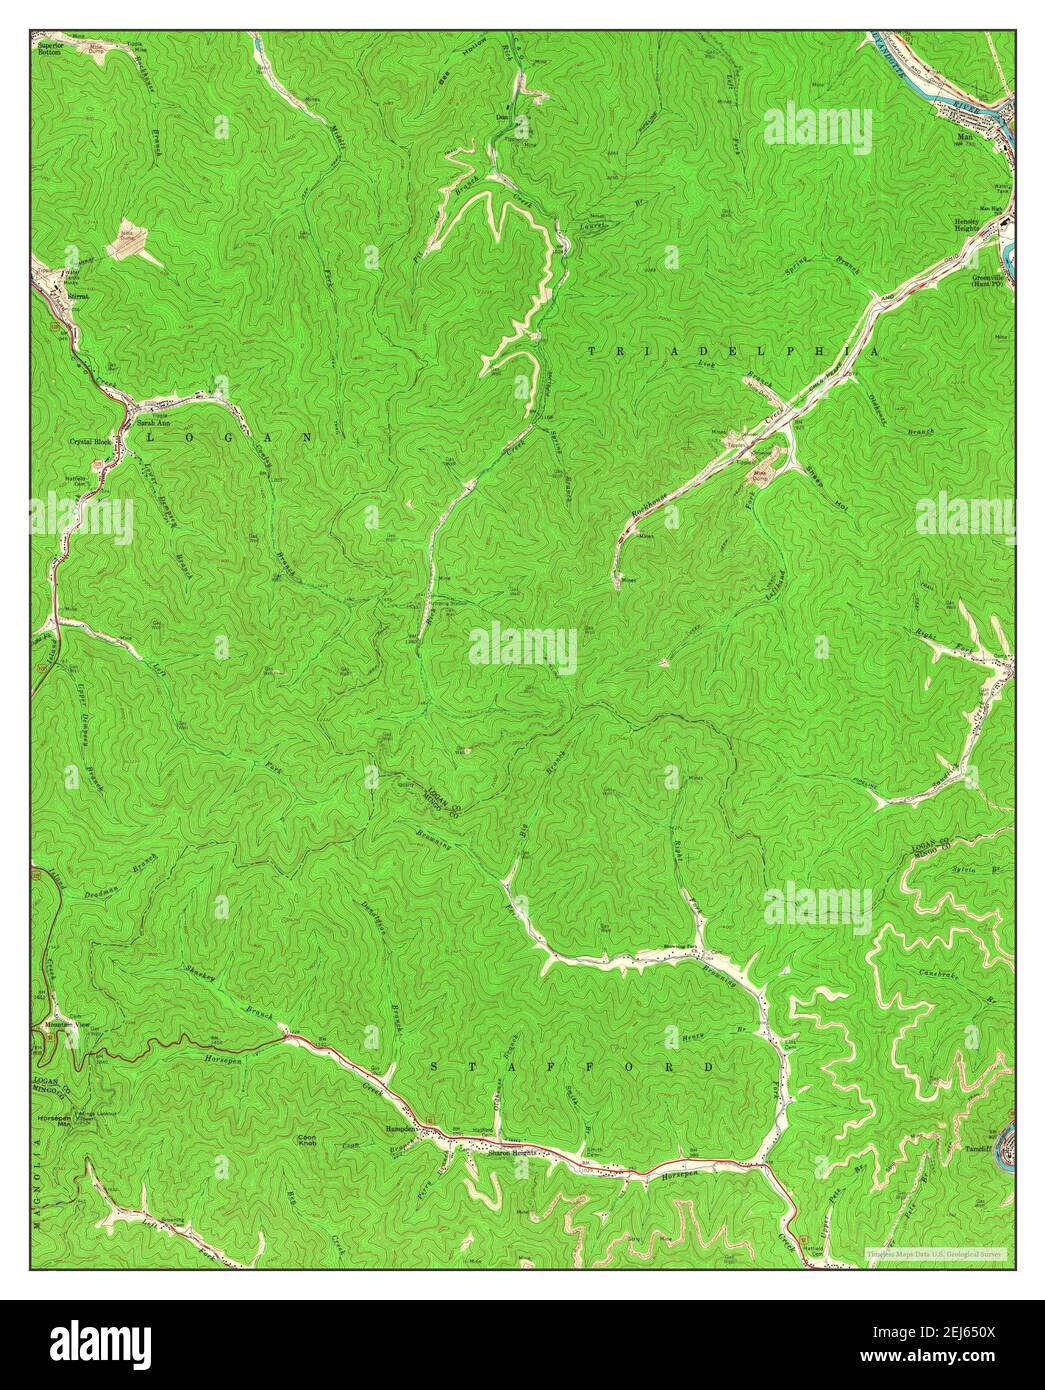 Man, West Virginia, map 1963, 1:24000, United States of America by Timeless Maps, data U.S. Geological Survey Stock Photo